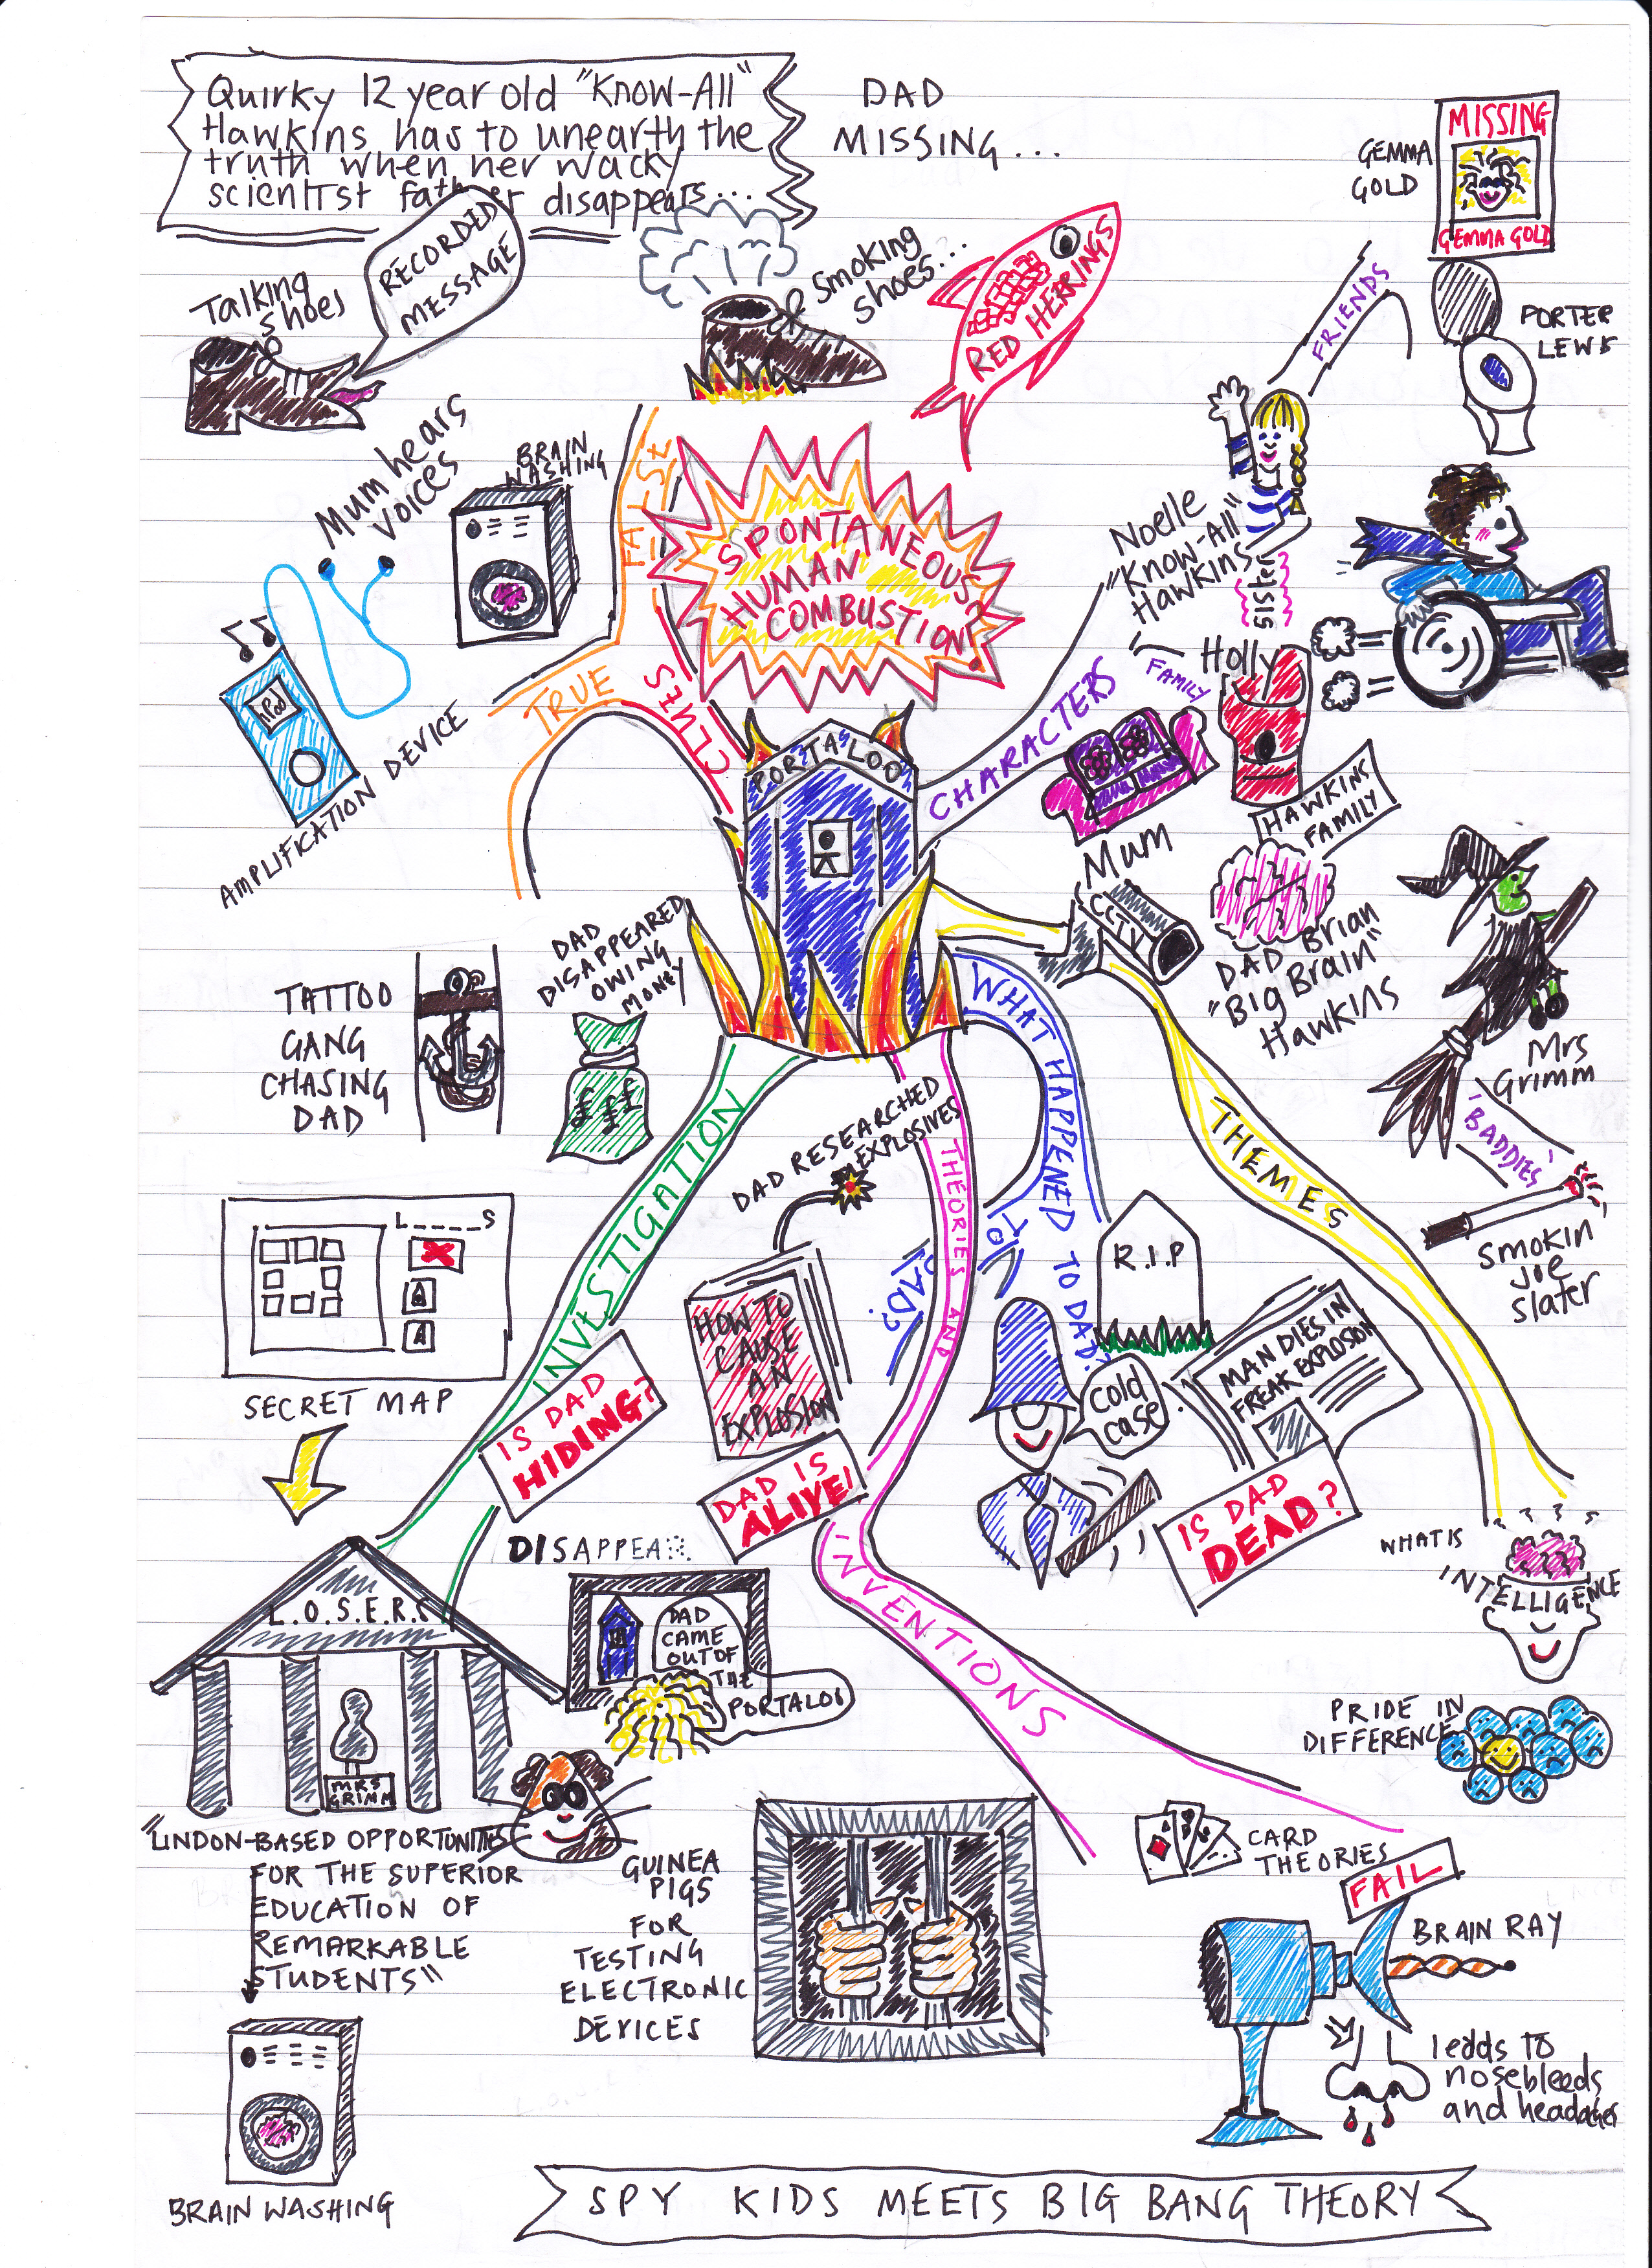 Exploding-loo-mind-map-without-Wylie (1) Exploding-loo-mind-map-without-Wylie